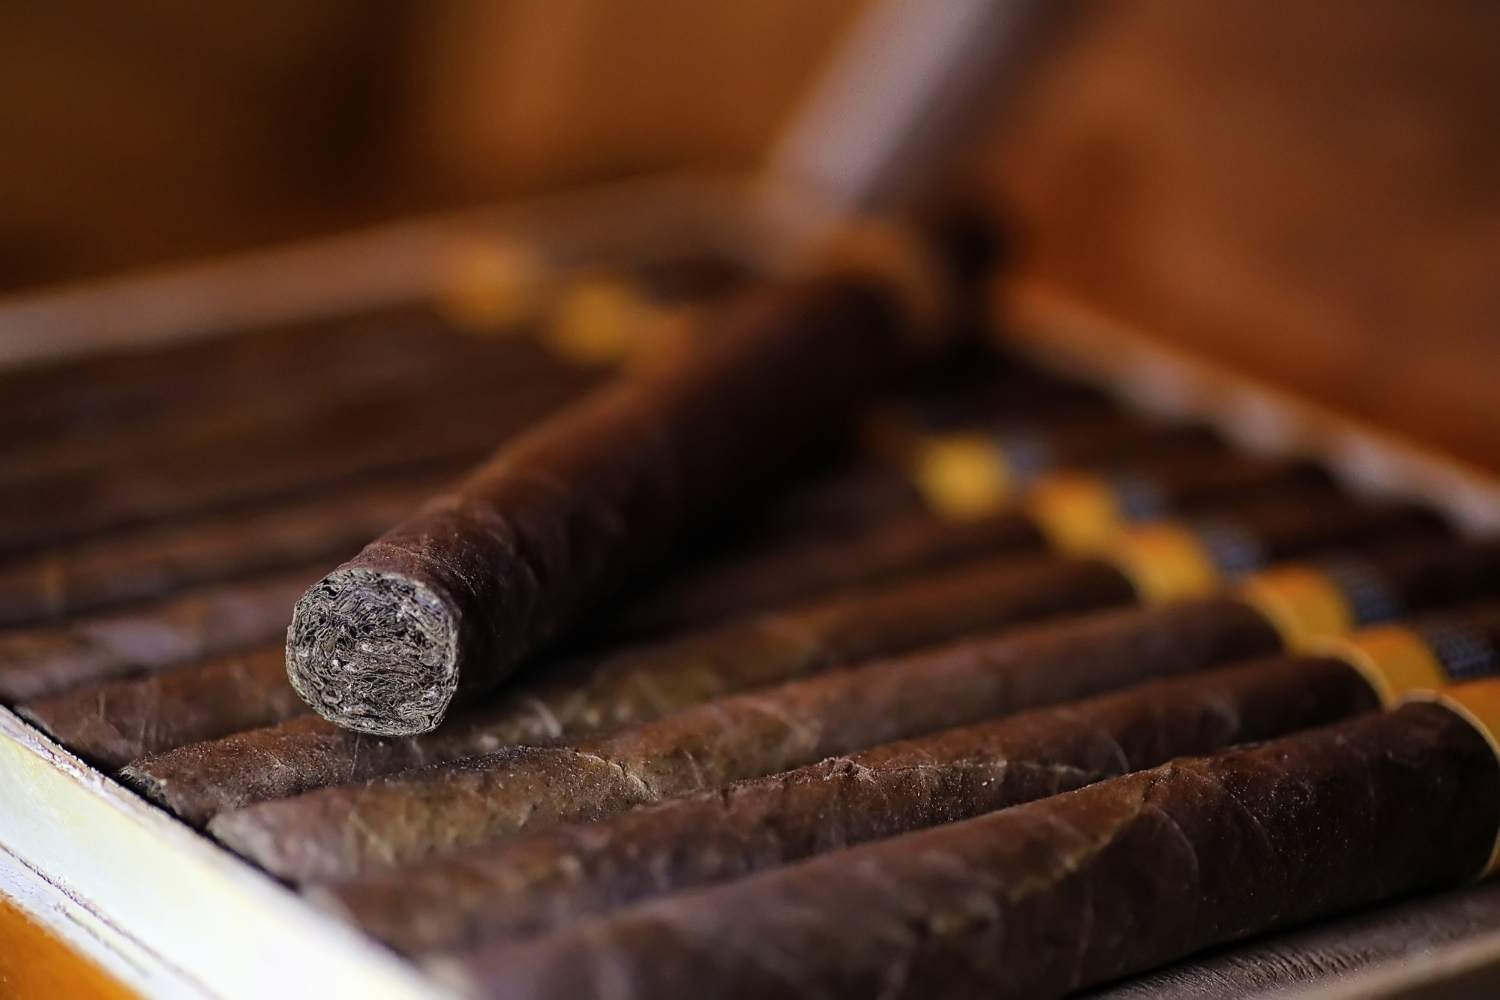 A cigar with white crystals referred as "plume or bloom" on the surface